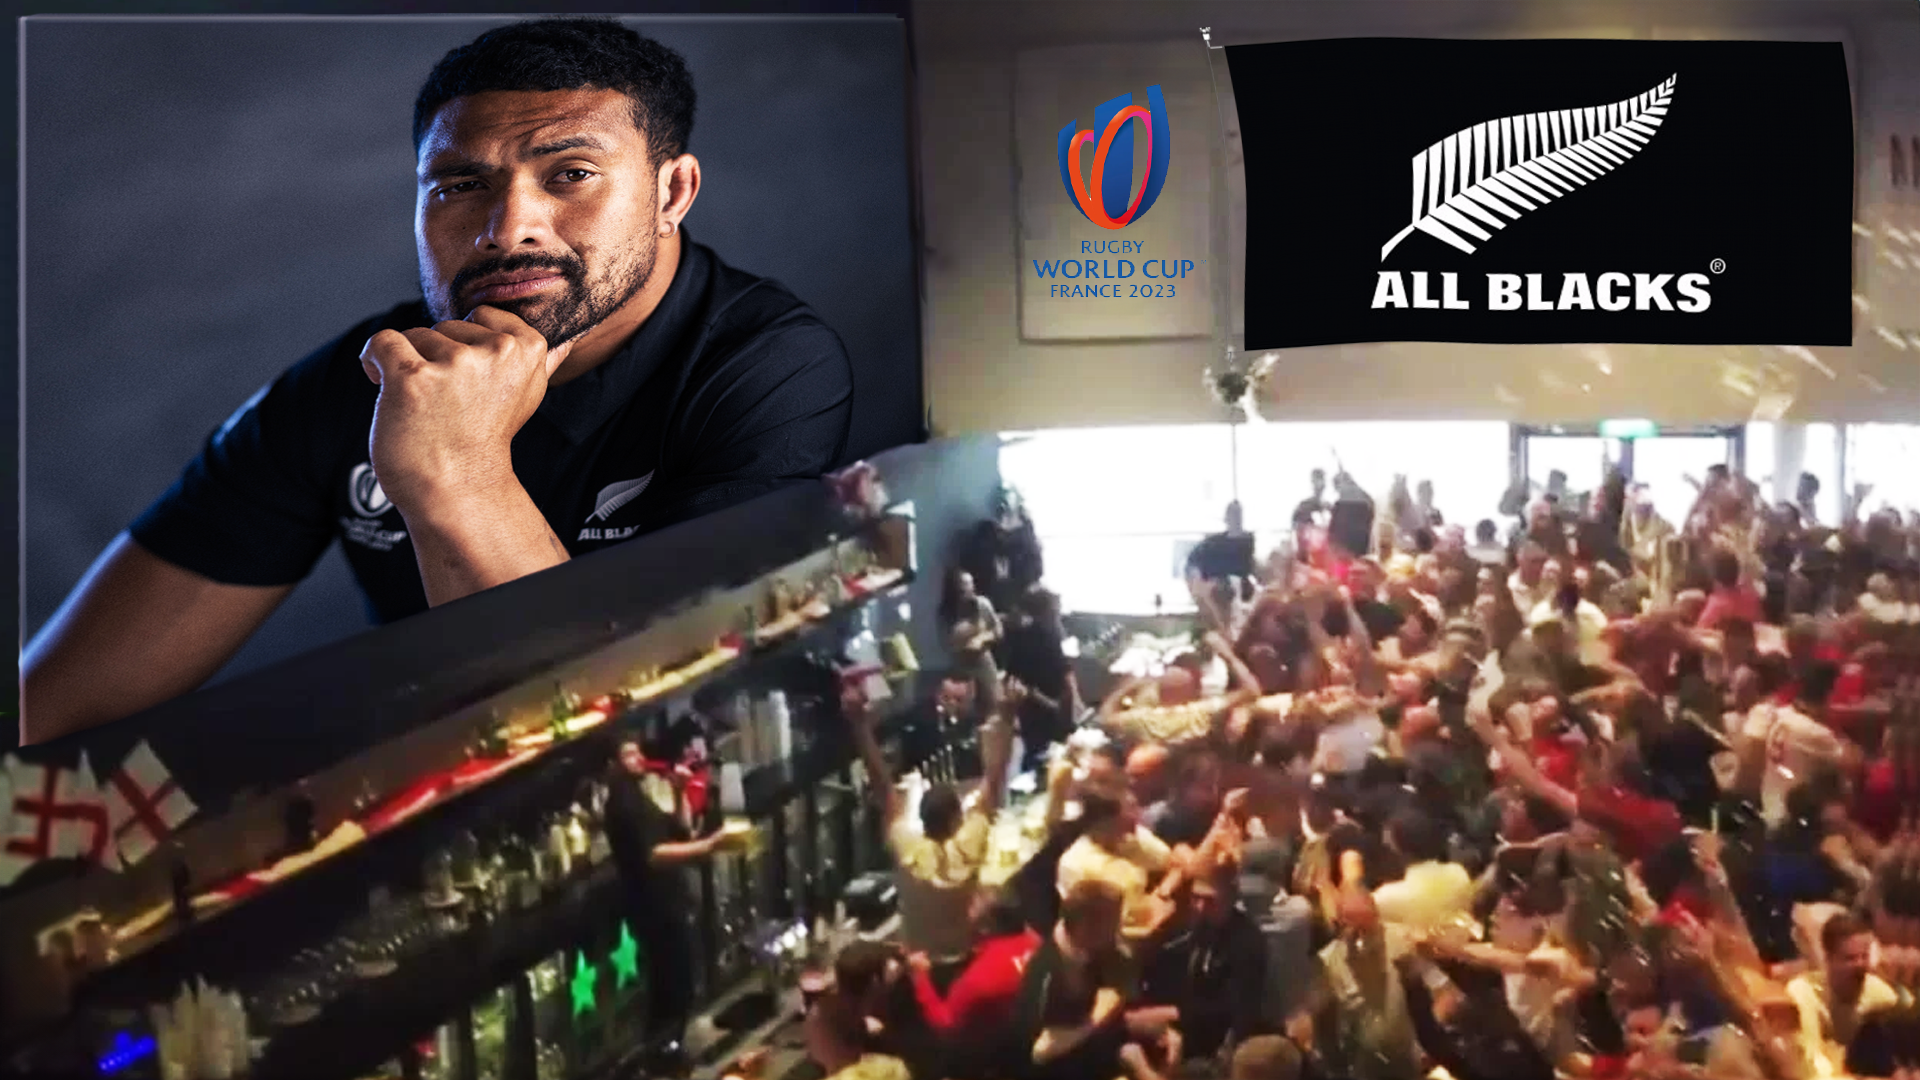 The best bars to watch the Rugby World Cup All Blacks v France game early as hell this weekend